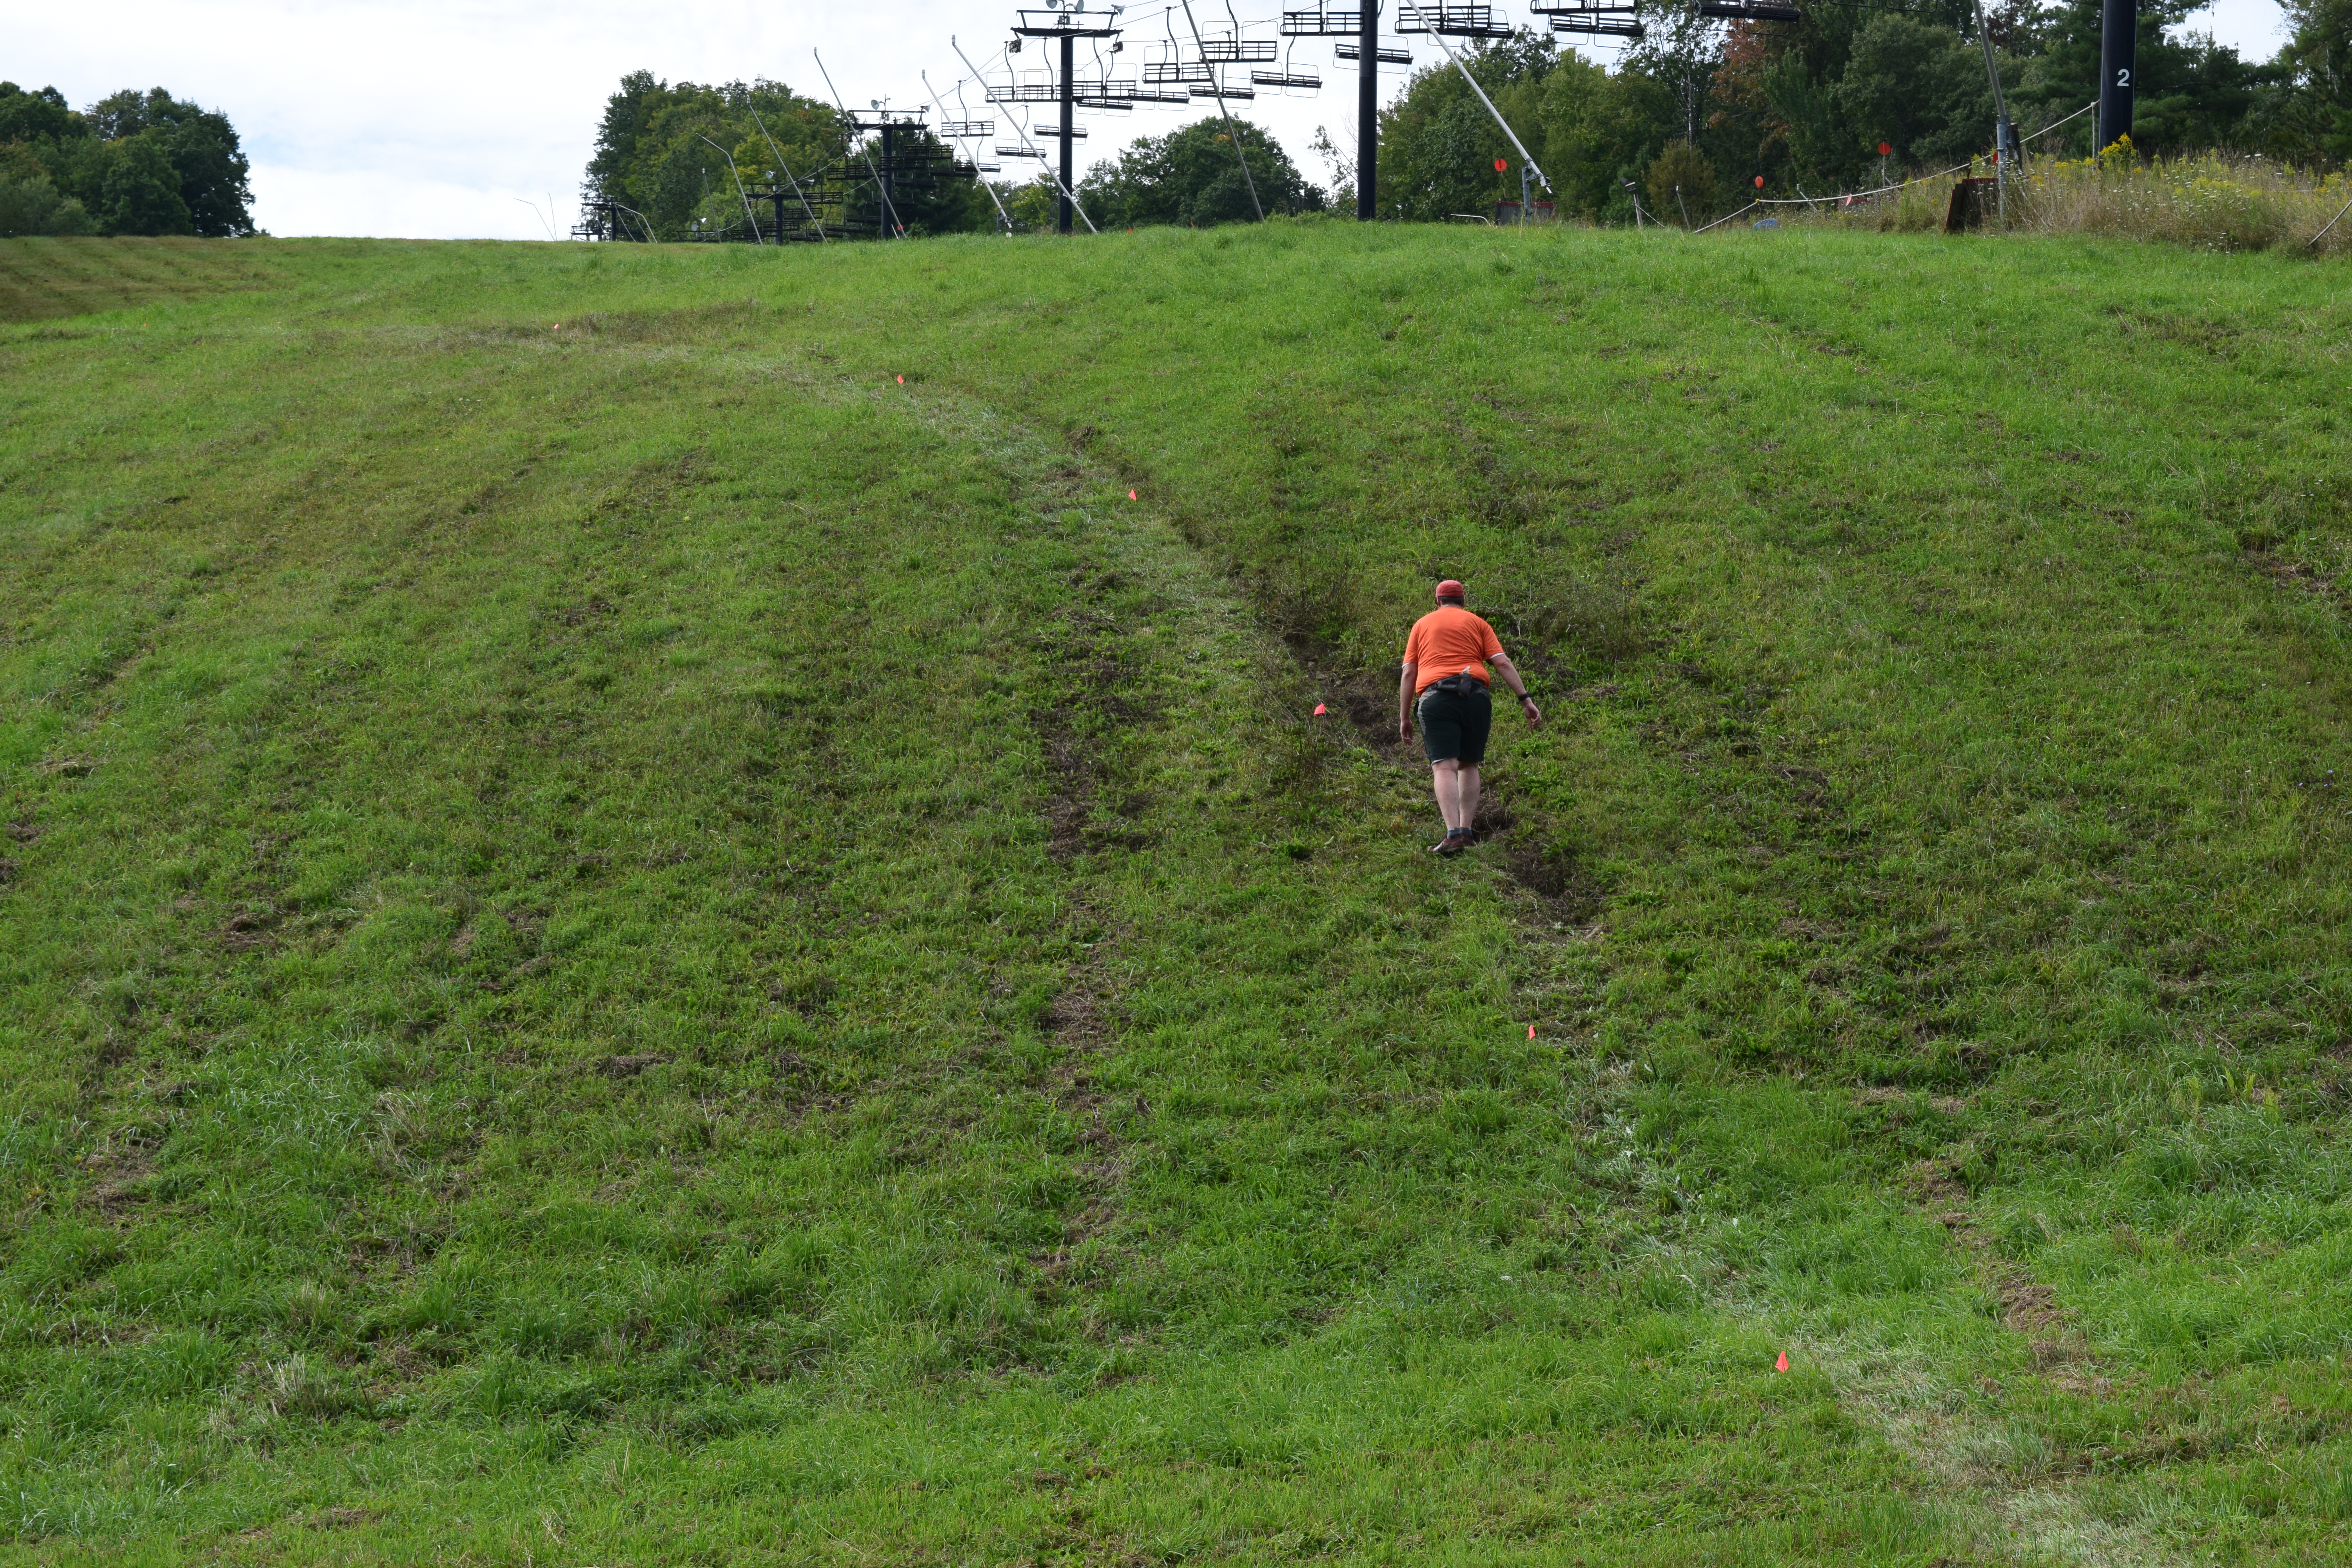 Me, wobbling up yet another hill